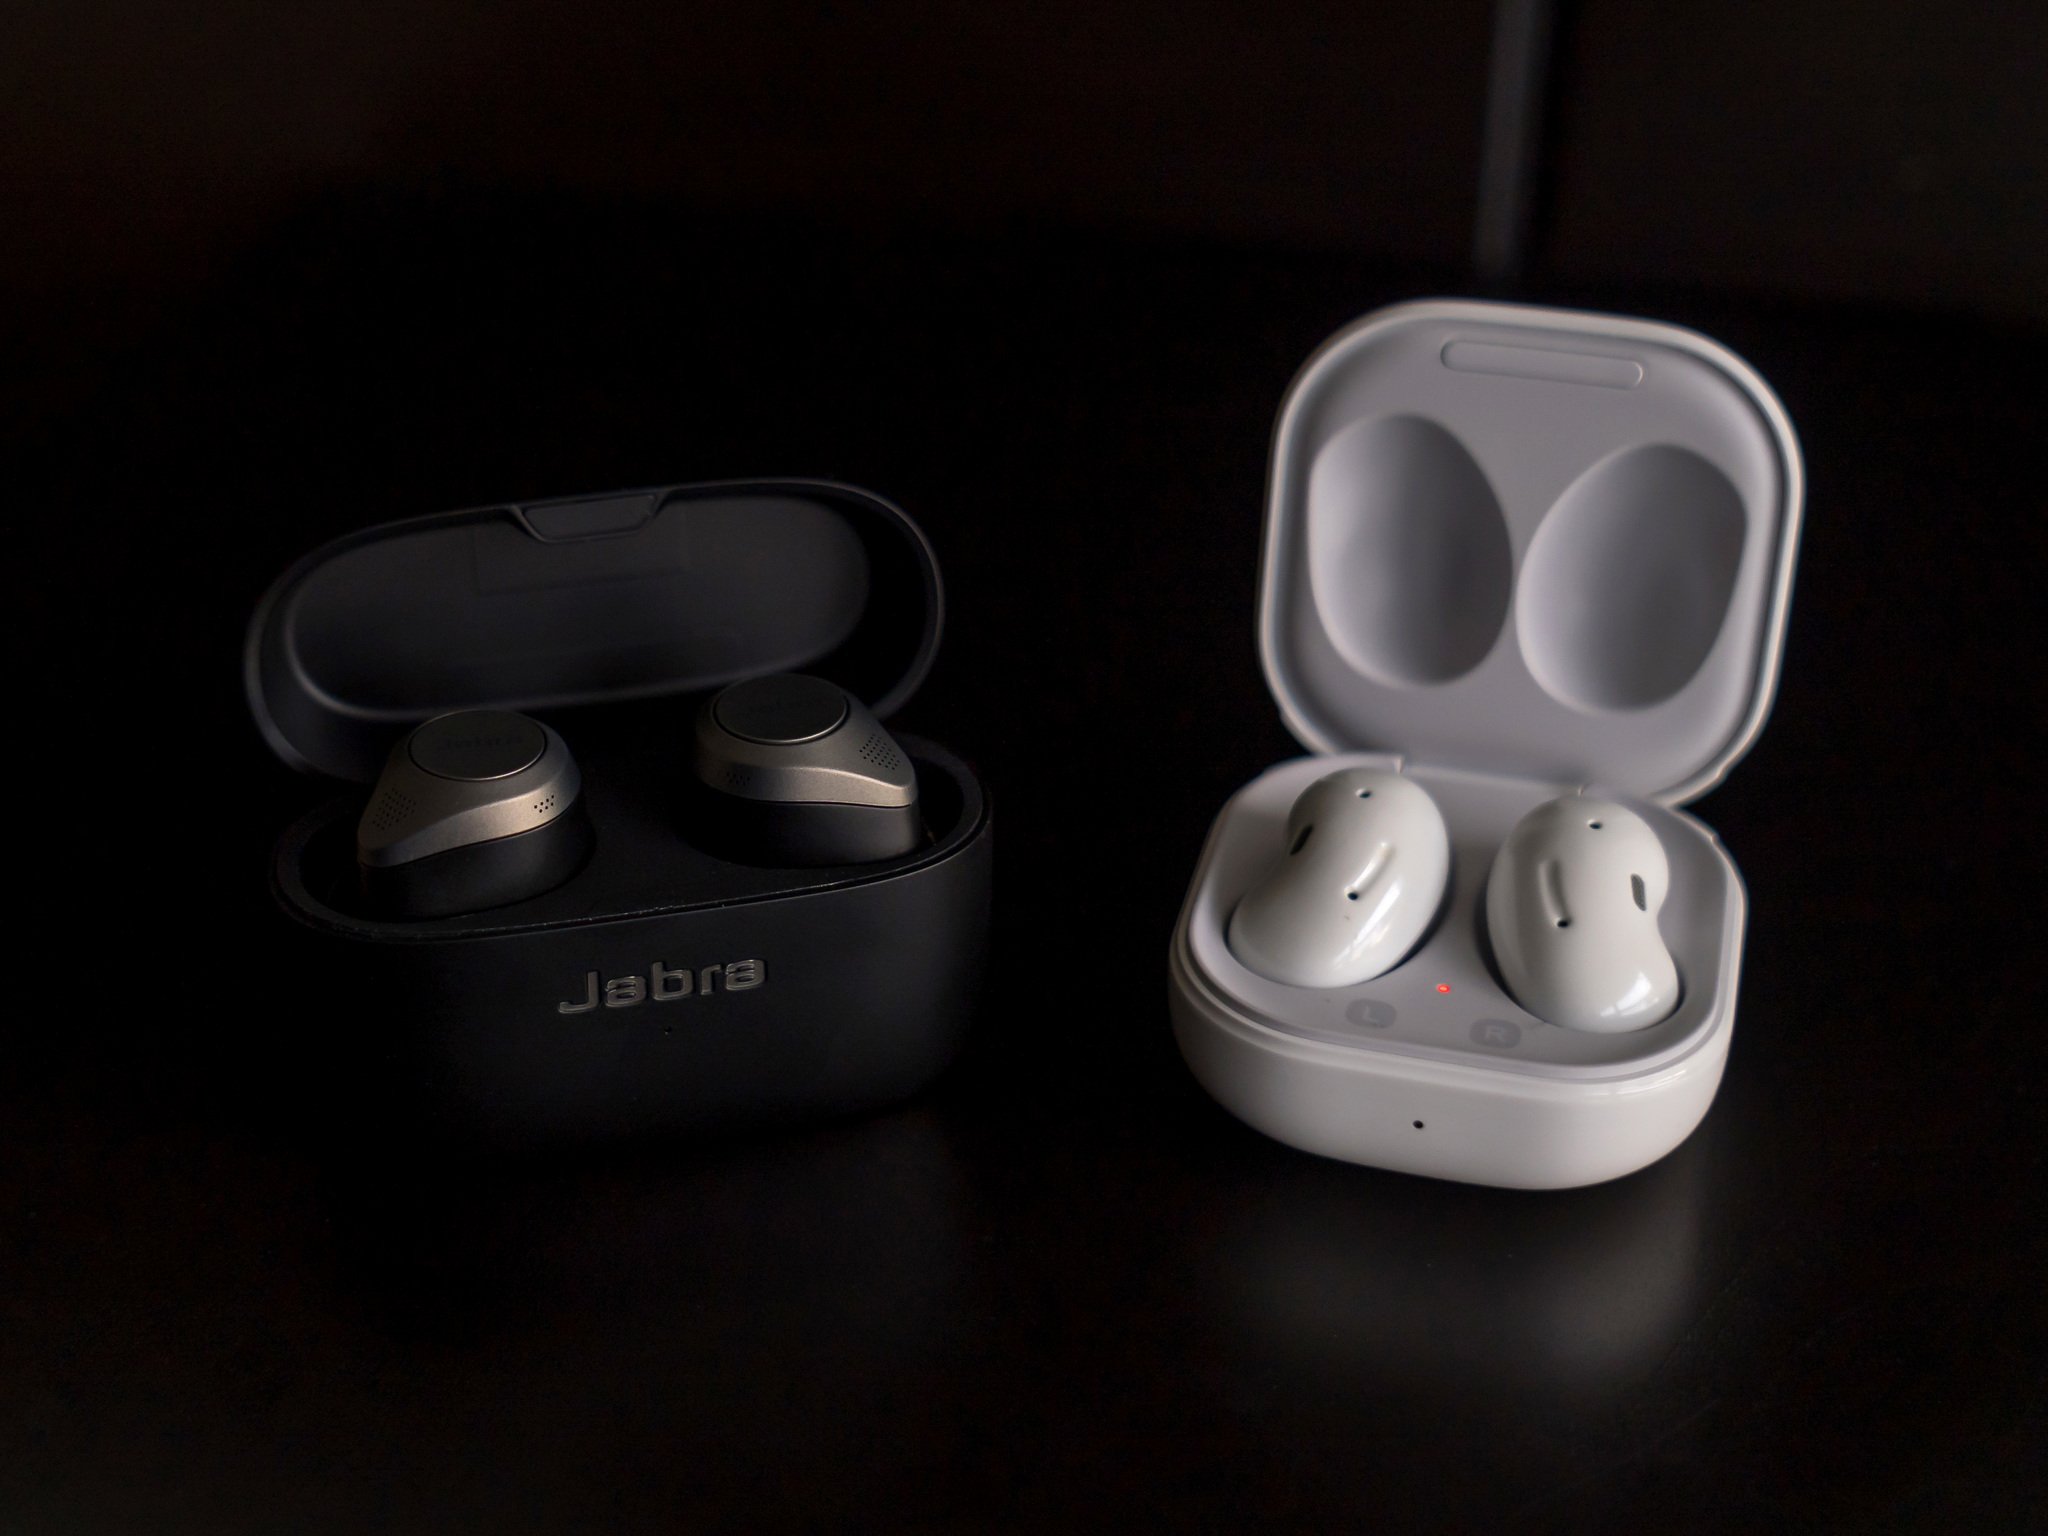 Jabra Elite 85t: How to get the best fit & performance